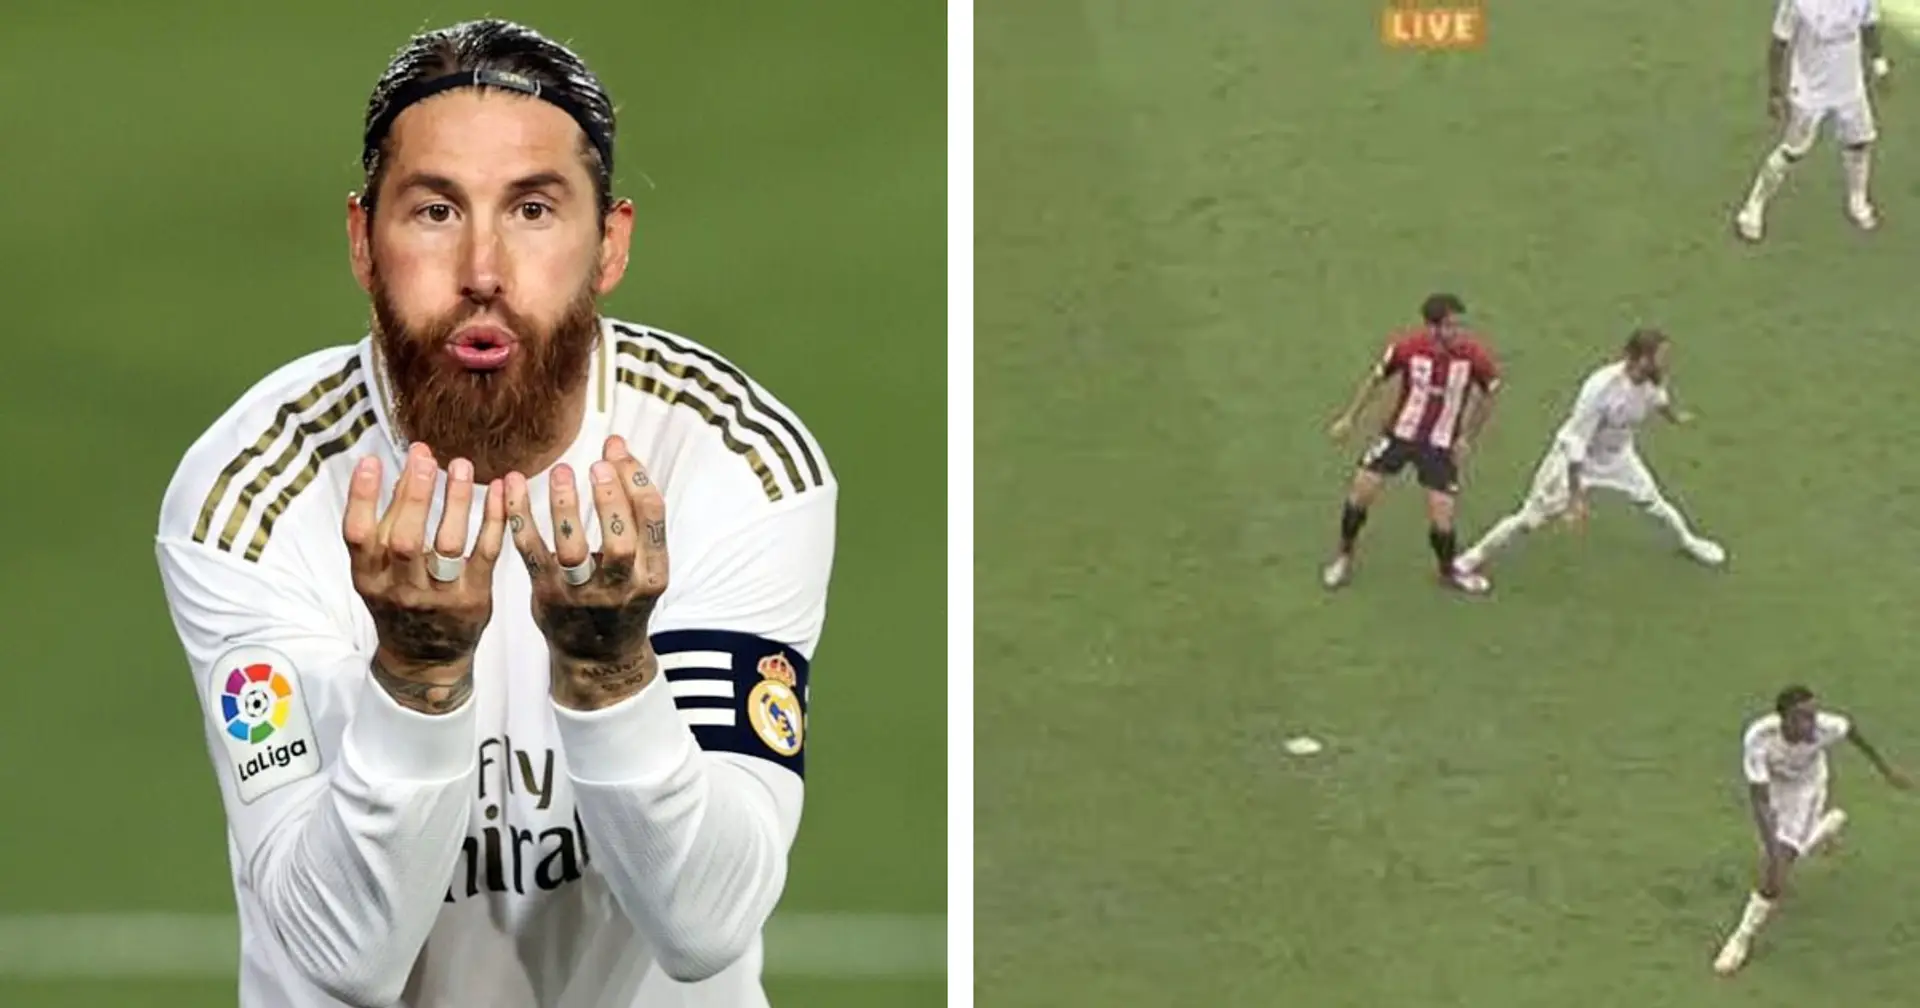 ‘I don’t see it as a penalty’: Ramos reacts to accidentally stepping on Raul Garcia’s foot in Athletic win